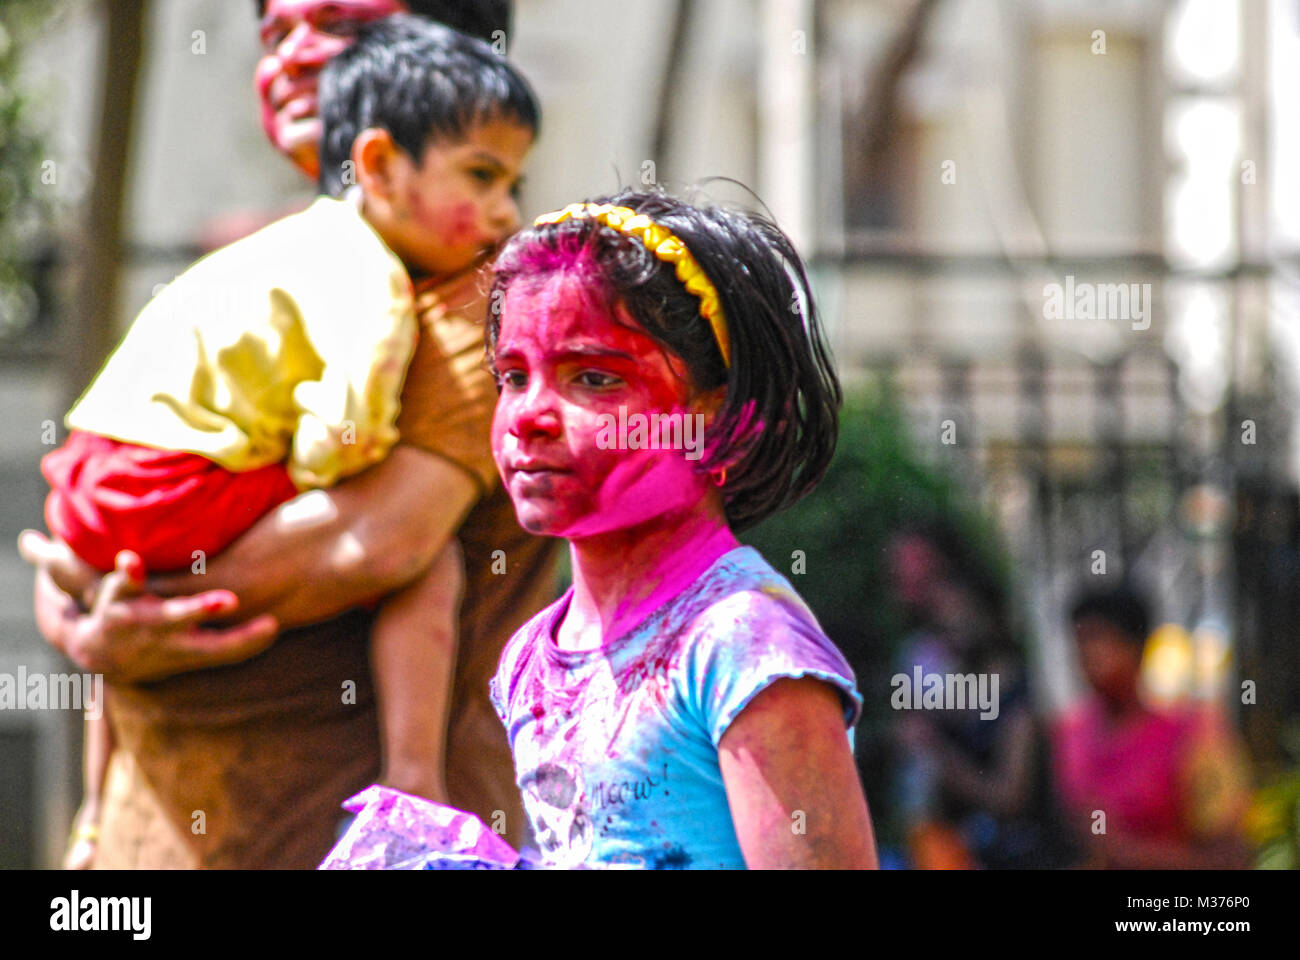 A young girl is covered in powder paint during the celebration of Holi in Hyderabad, India. Stock Photo